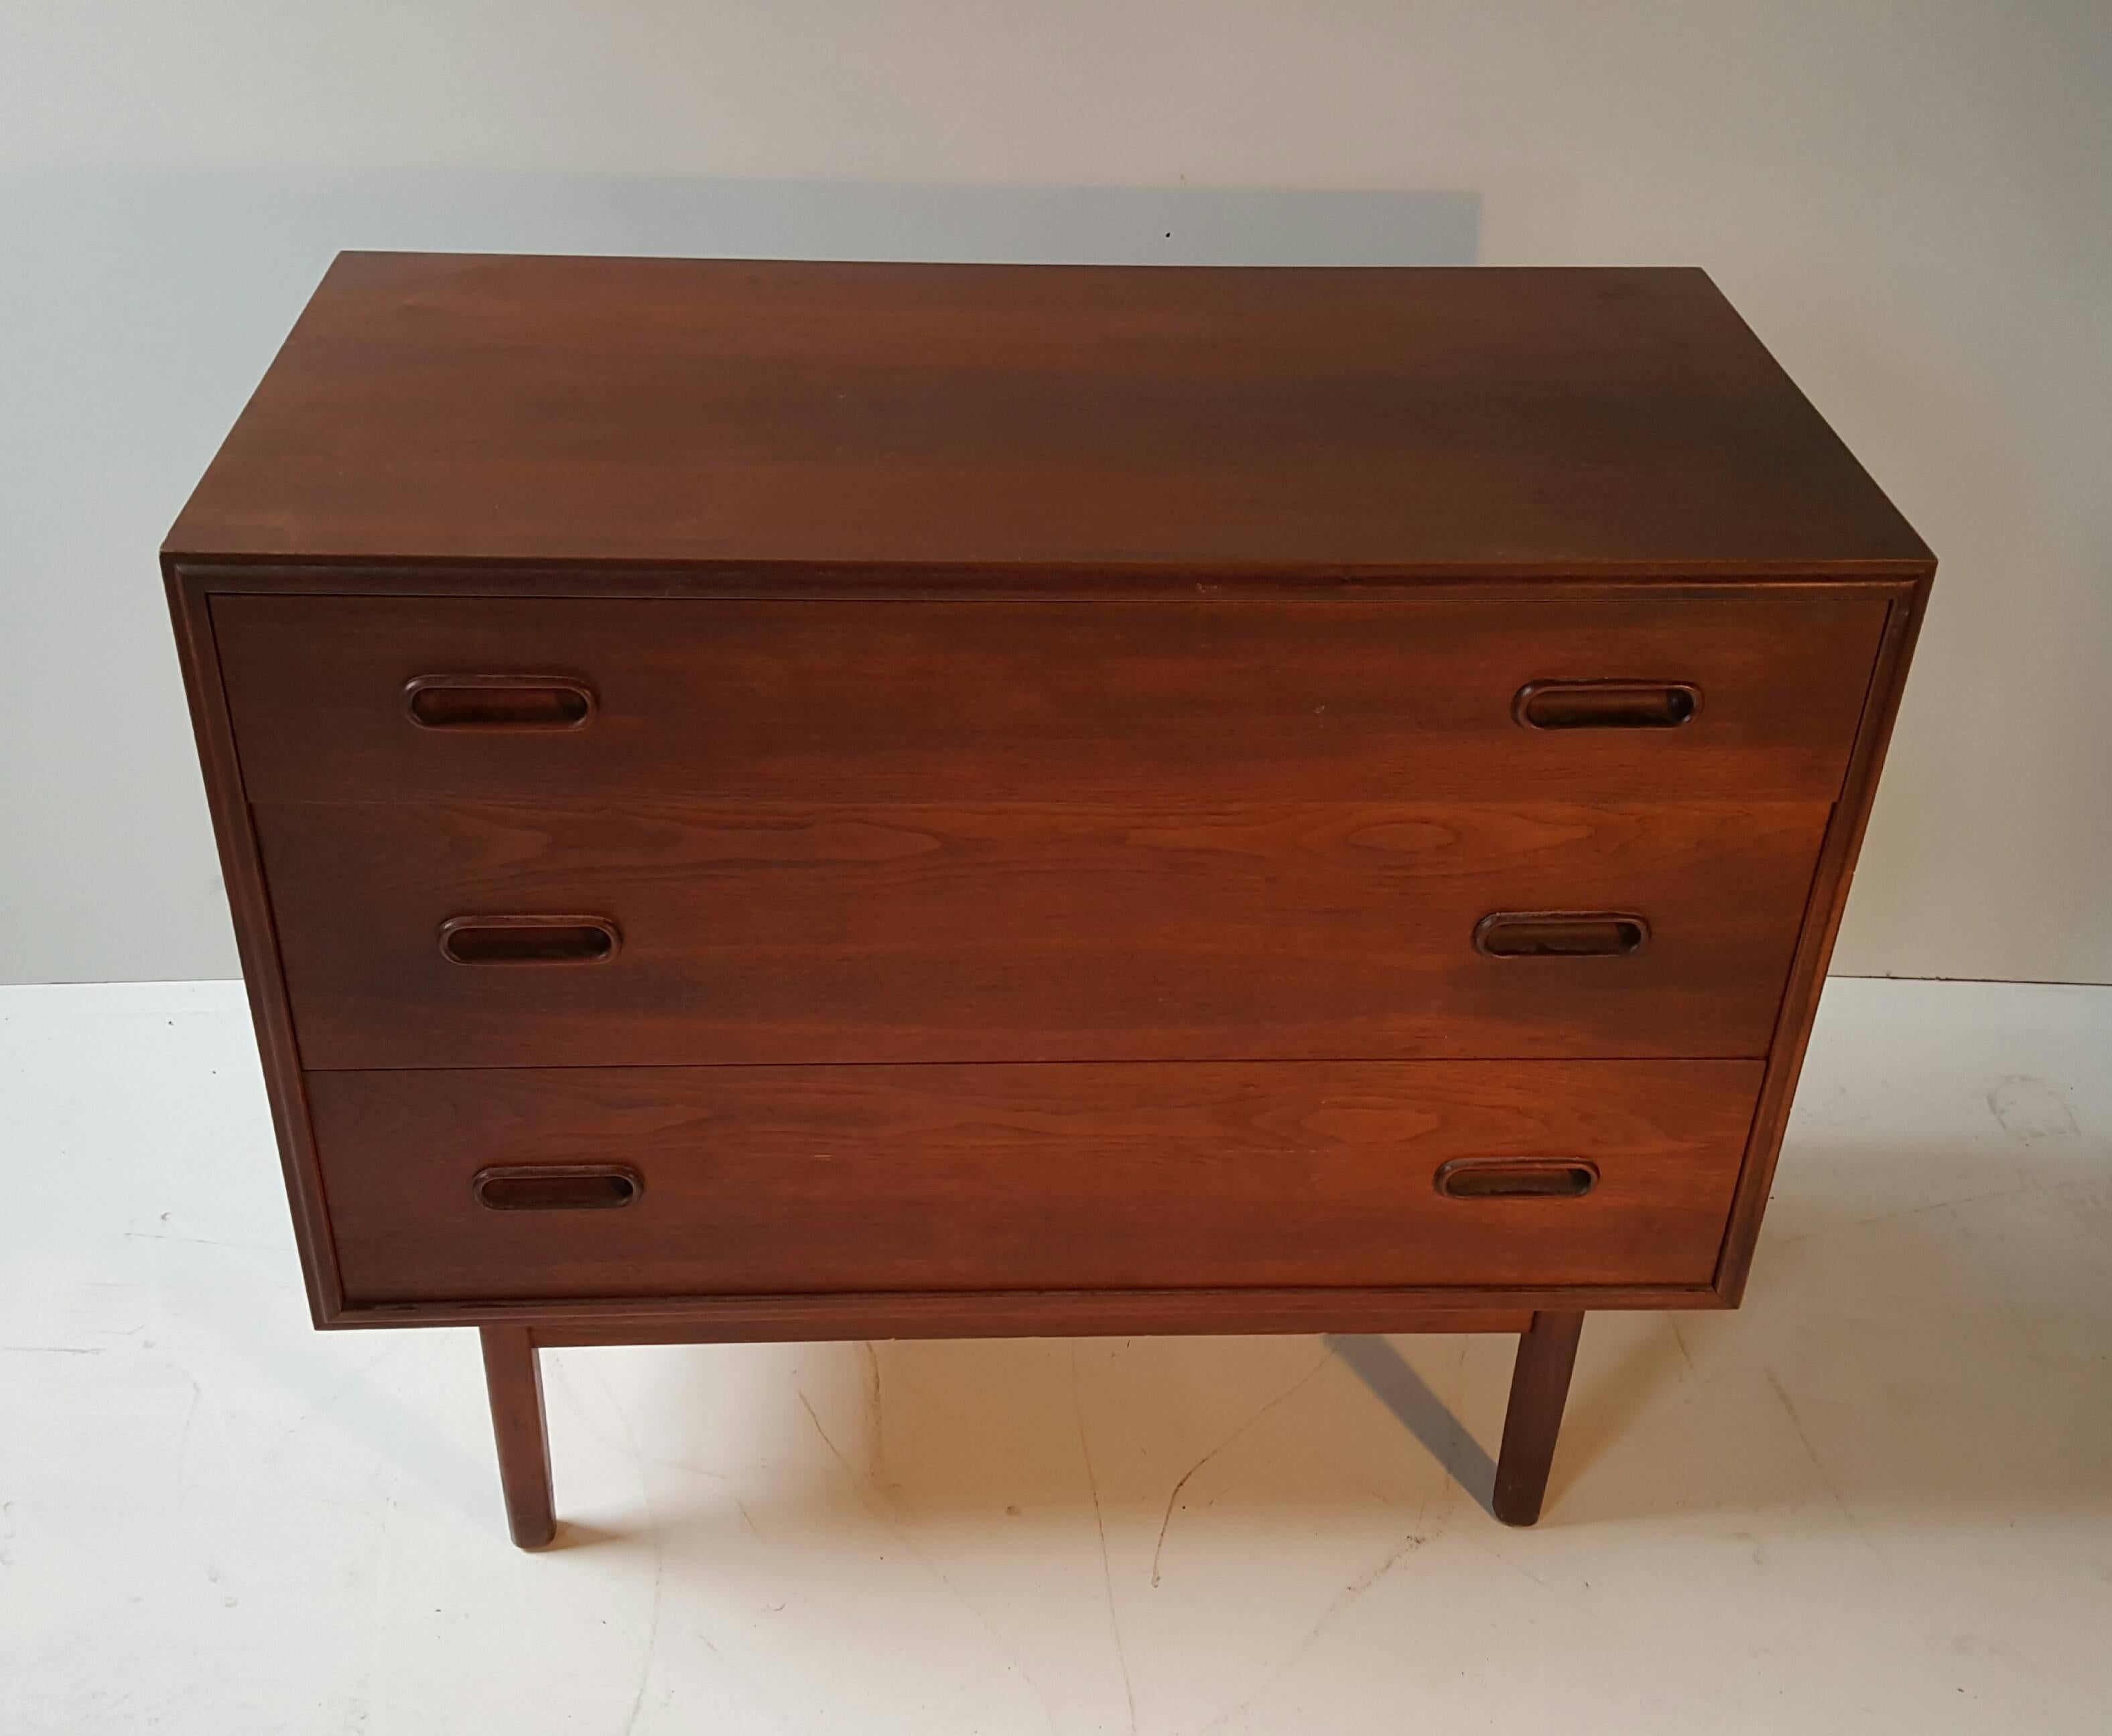 Classic Danish modernist three-drawer chest of drawers. Sleek simple, elegant design, handsome sculptural drawer pulls, nice quality and construction, dovetail joints.